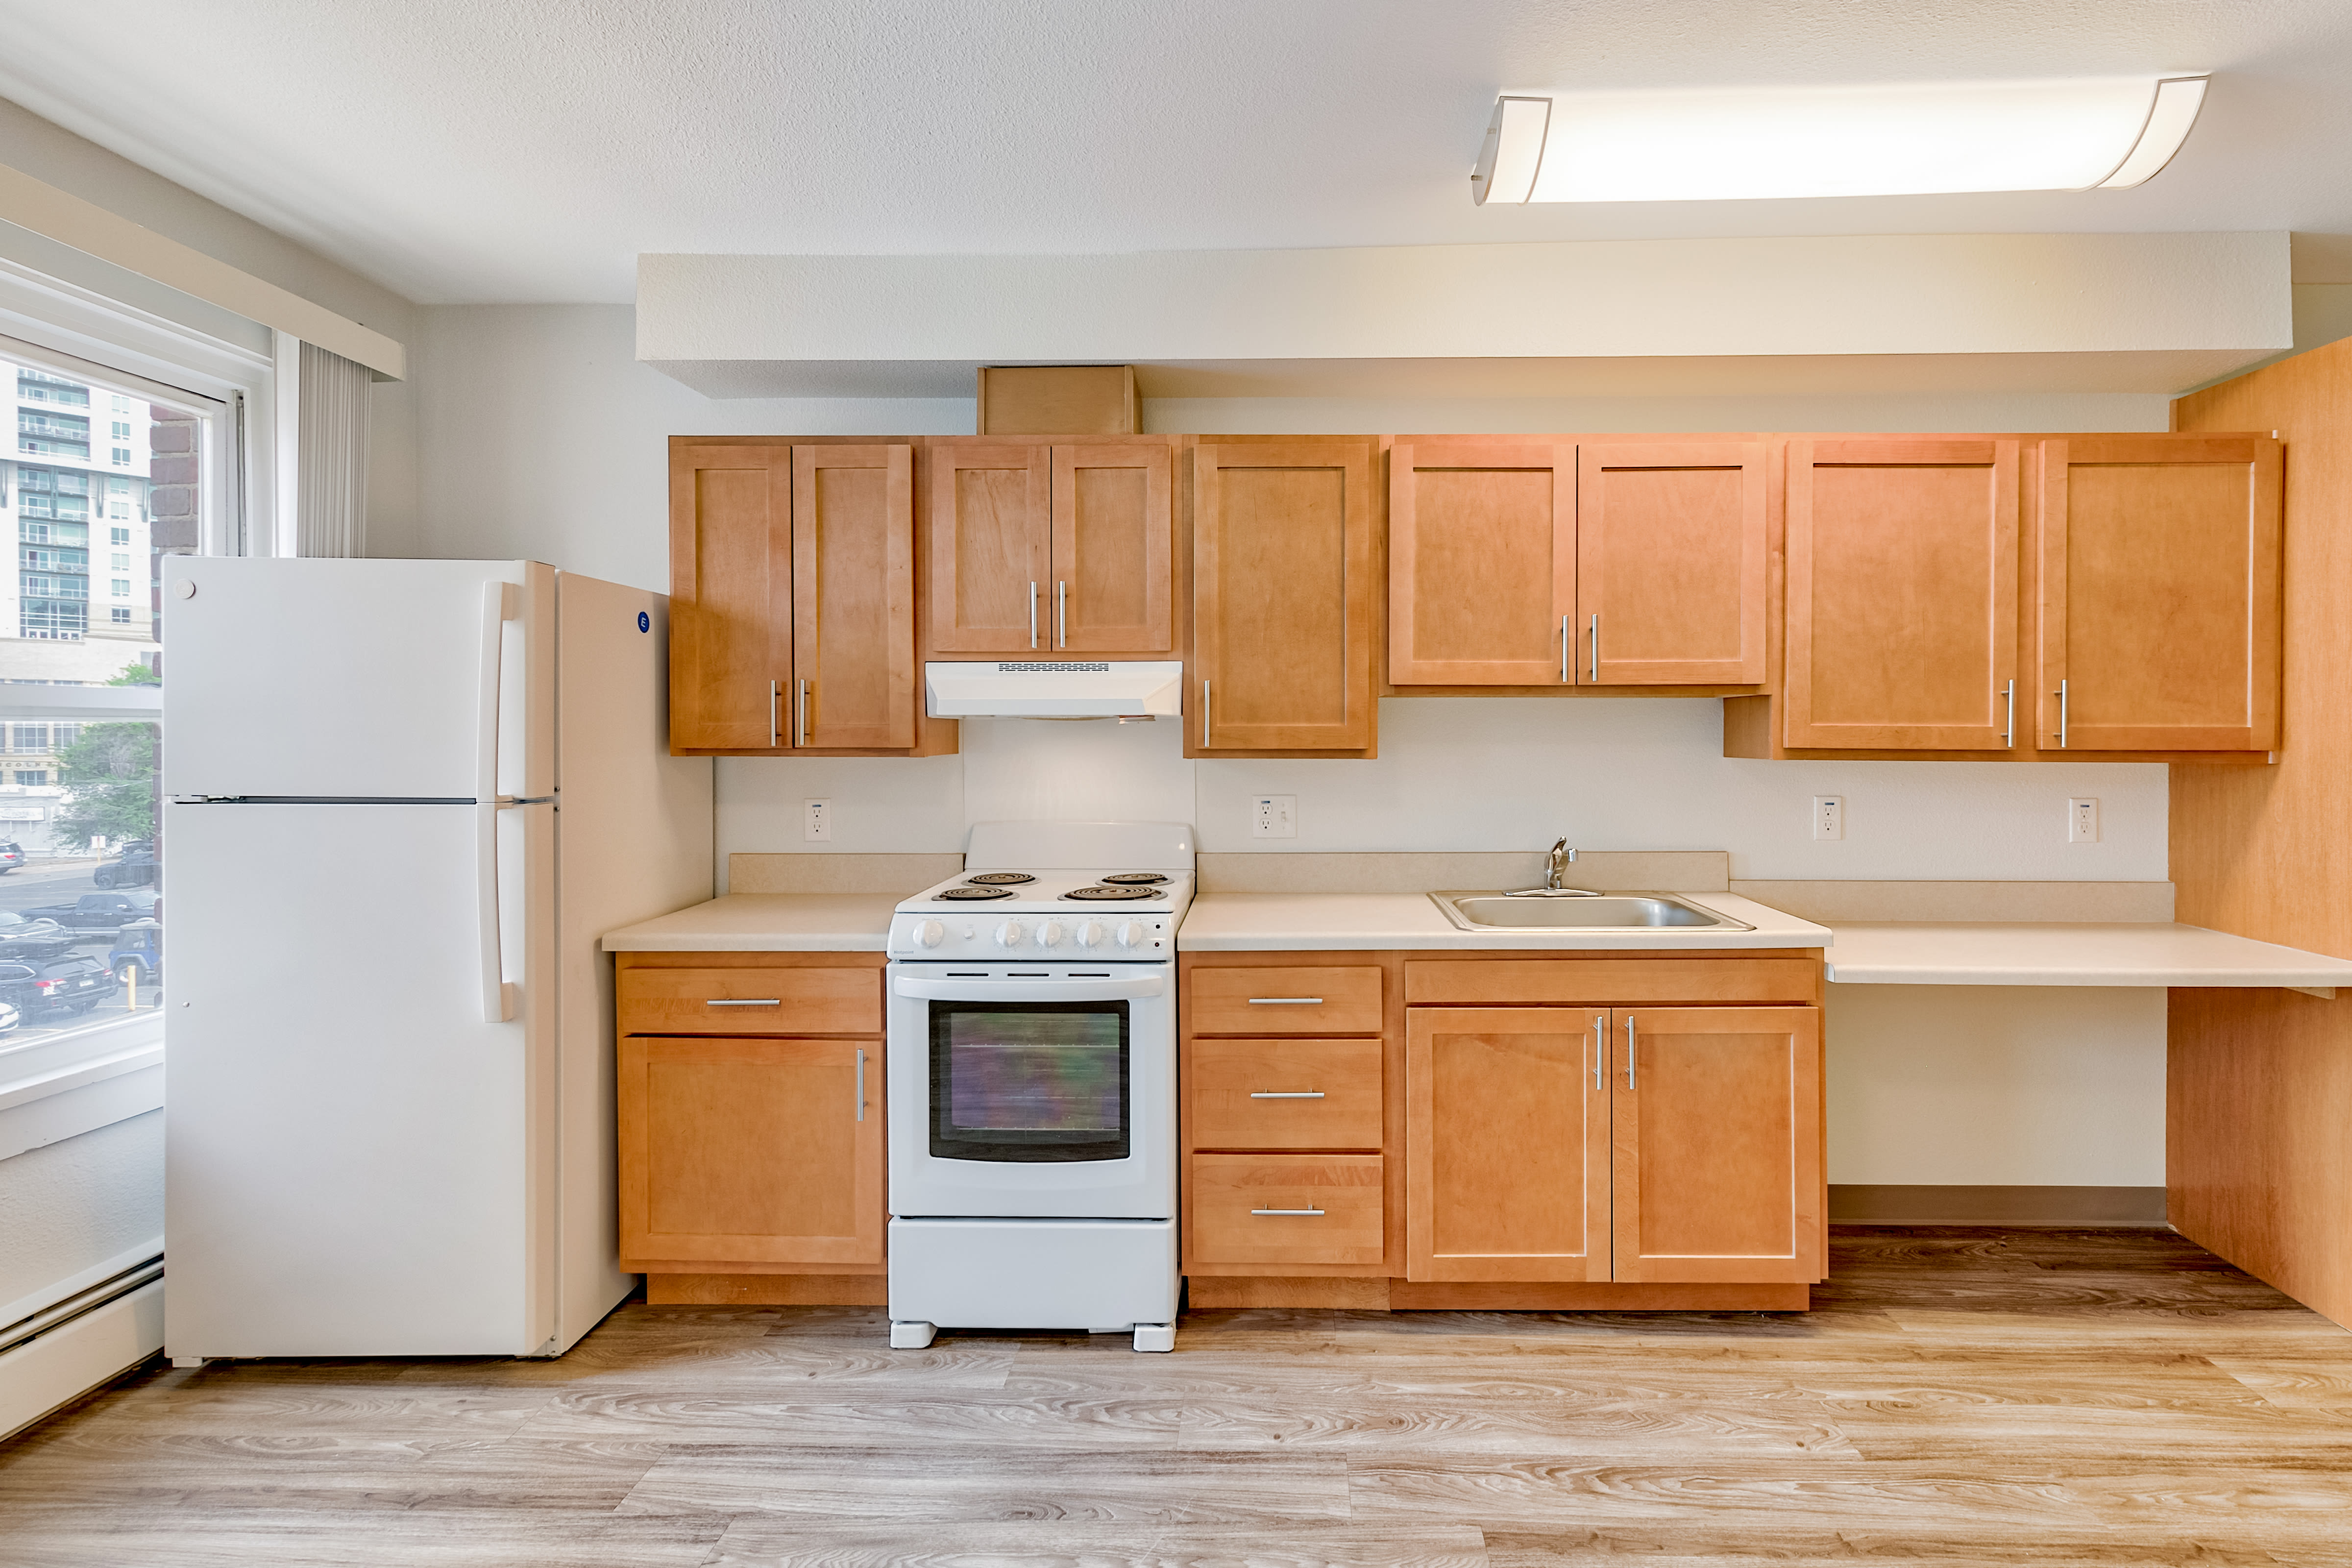 Fully equipped kitchen with natural wood cabinetry at Drehmoor Apartments in Denver, Colorado